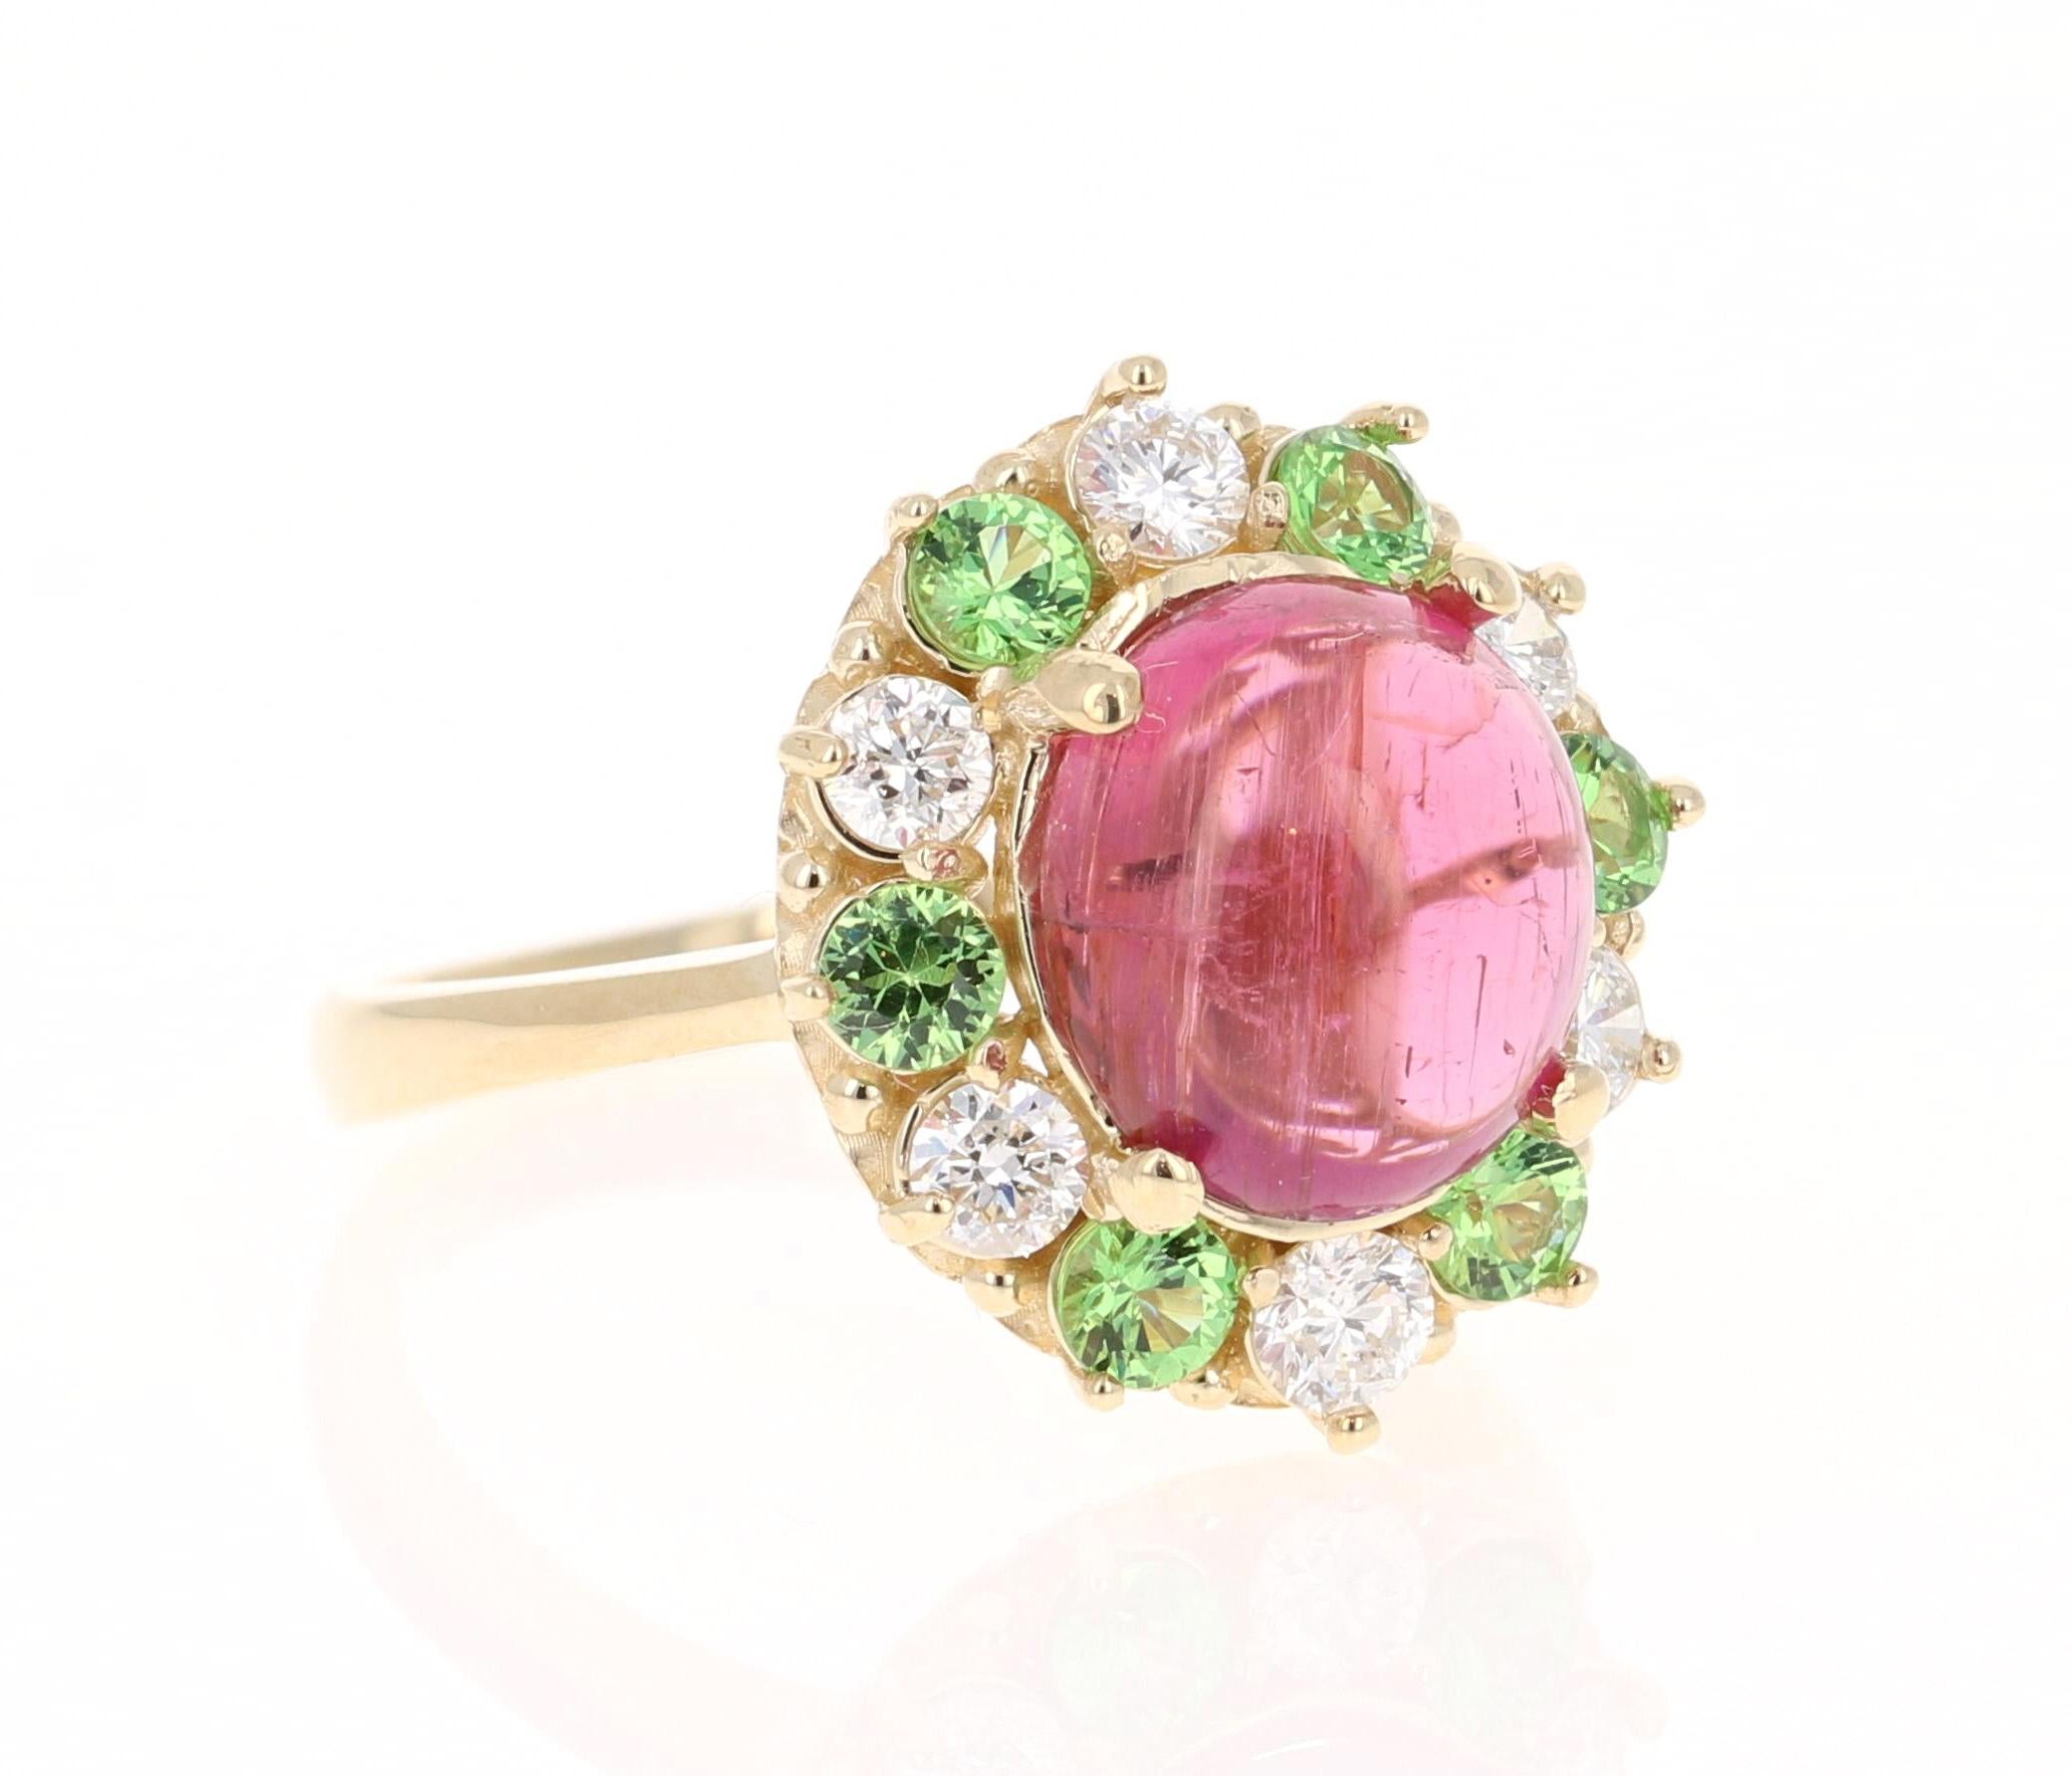 Stunning and uniquely designed 4.78 Carat Pink Tourmaline, Tsavorite, Diamond Yellow Gold Cocktail Ring! 

This ring has a 3.66 Carat Oval Cabochon Cut Pink Tourmaline that measures at 10 mm x 11 mm (width x length) and is surrounded by 6 Tsavorites